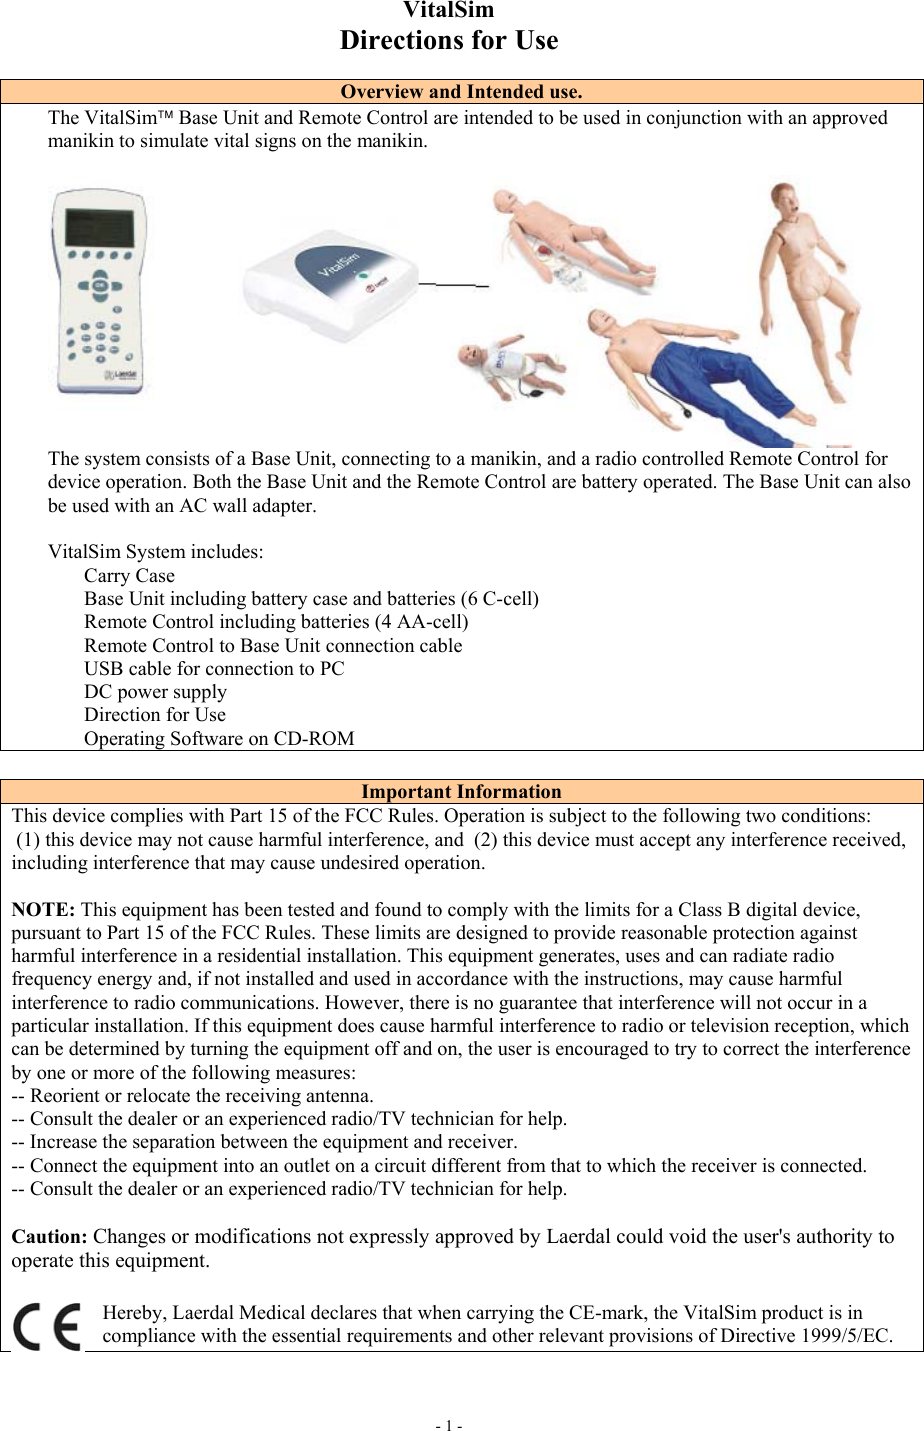     - 1 - VitalSim Directions for Use  Overview and Intended use. The VitalSim Base Unit and Remote Control are intended to be used in conjunction with an approved manikin to simulate vital signs on the manikin.    The system consists of a Base Unit, connecting to a manikin, and a radio controlled Remote Control for device operation. Both the Base Unit and the Remote Control are battery operated. The Base Unit can also be used with an AC wall adapter.  VitalSim System includes: Carry Case Base Unit including battery case and batteries (6 C-cell) Remote Control including batteries (4 AA-cell) Remote Control to Base Unit connection cable USB cable for connection to PC DC power supply Direction for Use Operating Software on CD-ROM  Important Information This device complies with Part 15 of the FCC Rules. Operation is subject to the following two conditions:  (1) this device may not cause harmful interference, and  (2) this device must accept any interference received, including interference that may cause undesired operation.  NOTE: This equipment has been tested and found to comply with the limits for a Class B digital device, pursuant to Part 15 of the FCC Rules. These limits are designed to provide reasonable protection against harmful interference in a residential installation. This equipment generates, uses and can radiate radio frequency energy and, if not installed and used in accordance with the instructions, may cause harmful interference to radio communications. However, there is no guarantee that interference will not occur in a particular installation. If this equipment does cause harmful interference to radio or television reception, which can be determined by turning the equipment off and on, the user is encouraged to try to correct the interference by one or more of the following measures: -- Reorient or relocate the receiving antenna. -- Consult the dealer or an experienced radio/TV technician for help. -- Increase the separation between the equipment and receiver. -- Connect the equipment into an outlet on a circuit different from that to which the receiver is connected. -- Consult the dealer or an experienced radio/TV technician for help.  Caution: Changes or modifications not expressly approved by Laerdal could void the user&apos;s authority to operate this equipment. Hereby, Laerdal Medical declares that when carrying the CE-mark, the VitalSim product is in compliance with the essential requirements and other relevant provisions of Directive 1999/5/EC.   